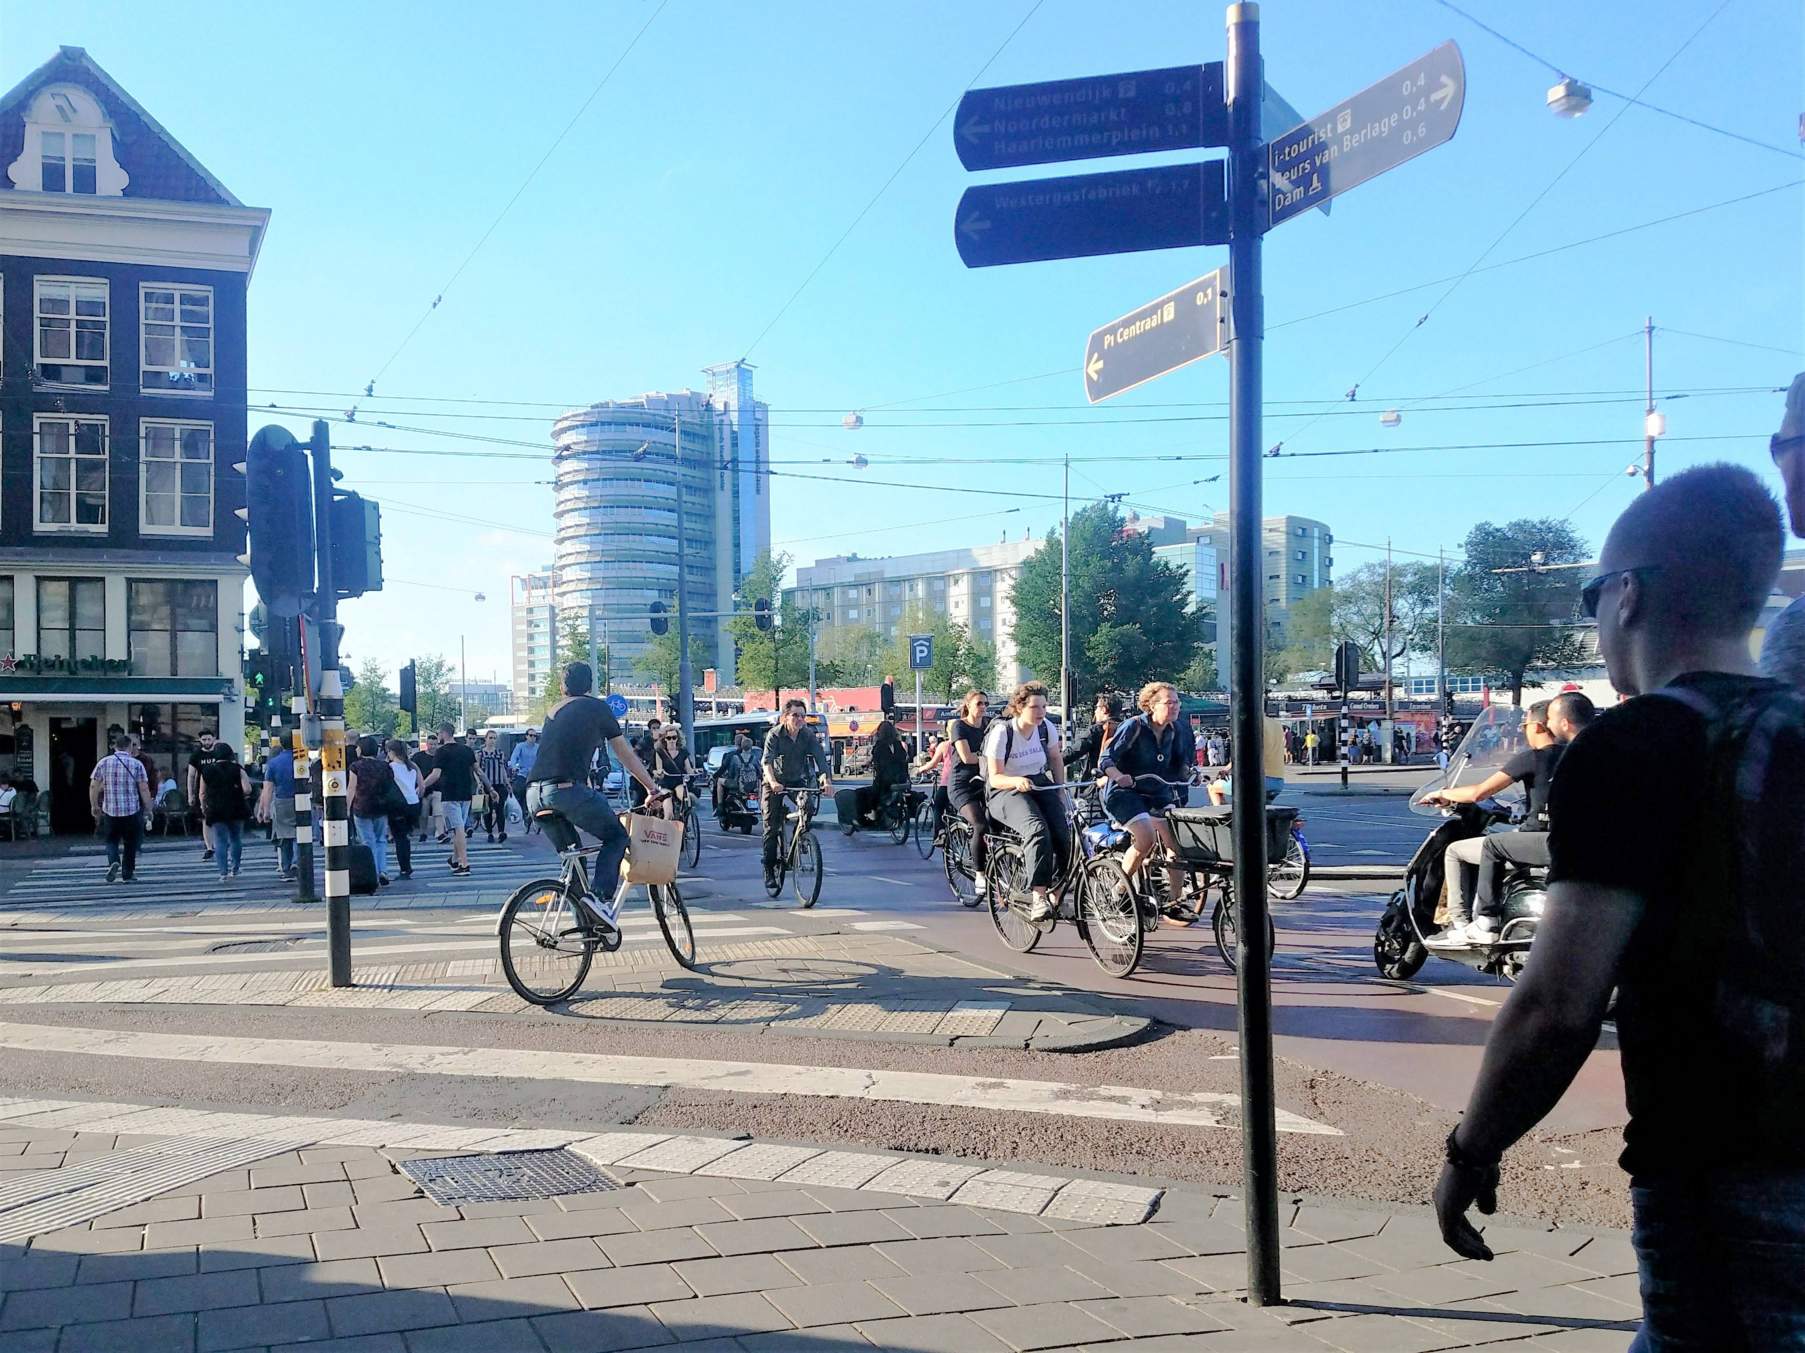 Busy intersection where pedestrians and cyclists have the right of way, in the Netherlands.